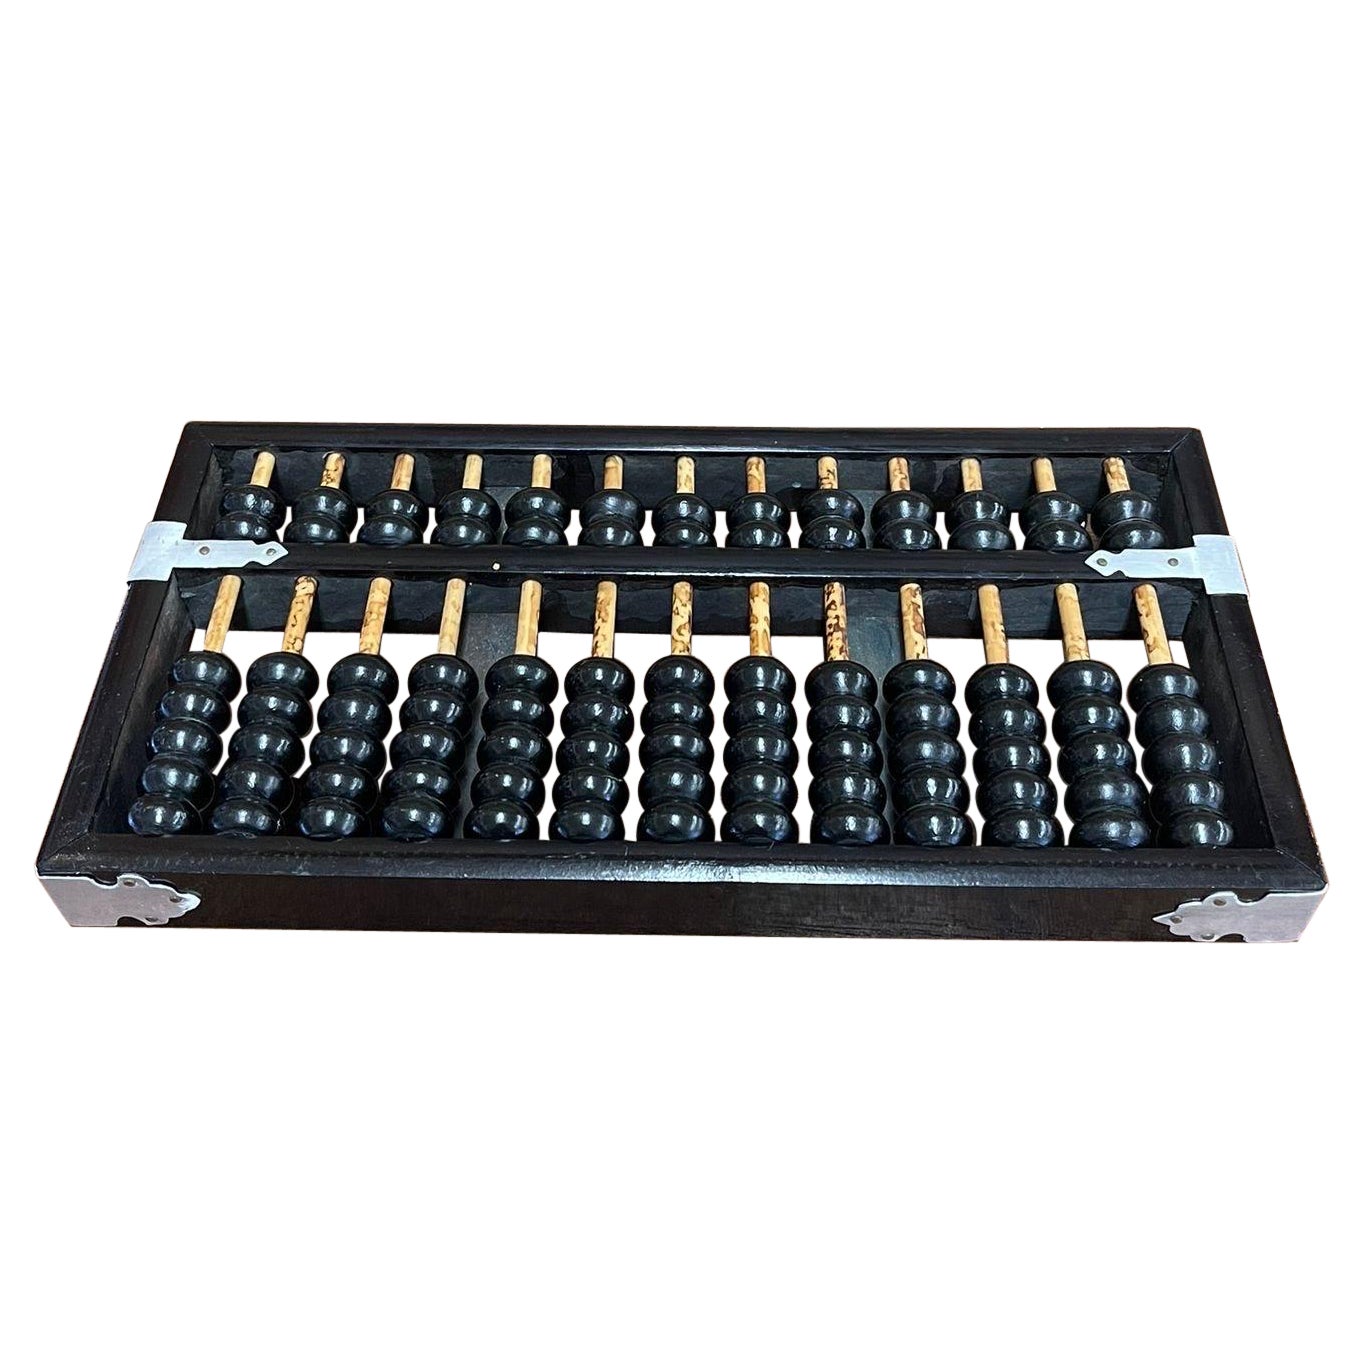 Vintage 13 Row Wooden Abacus With Silver Toned Hardware.